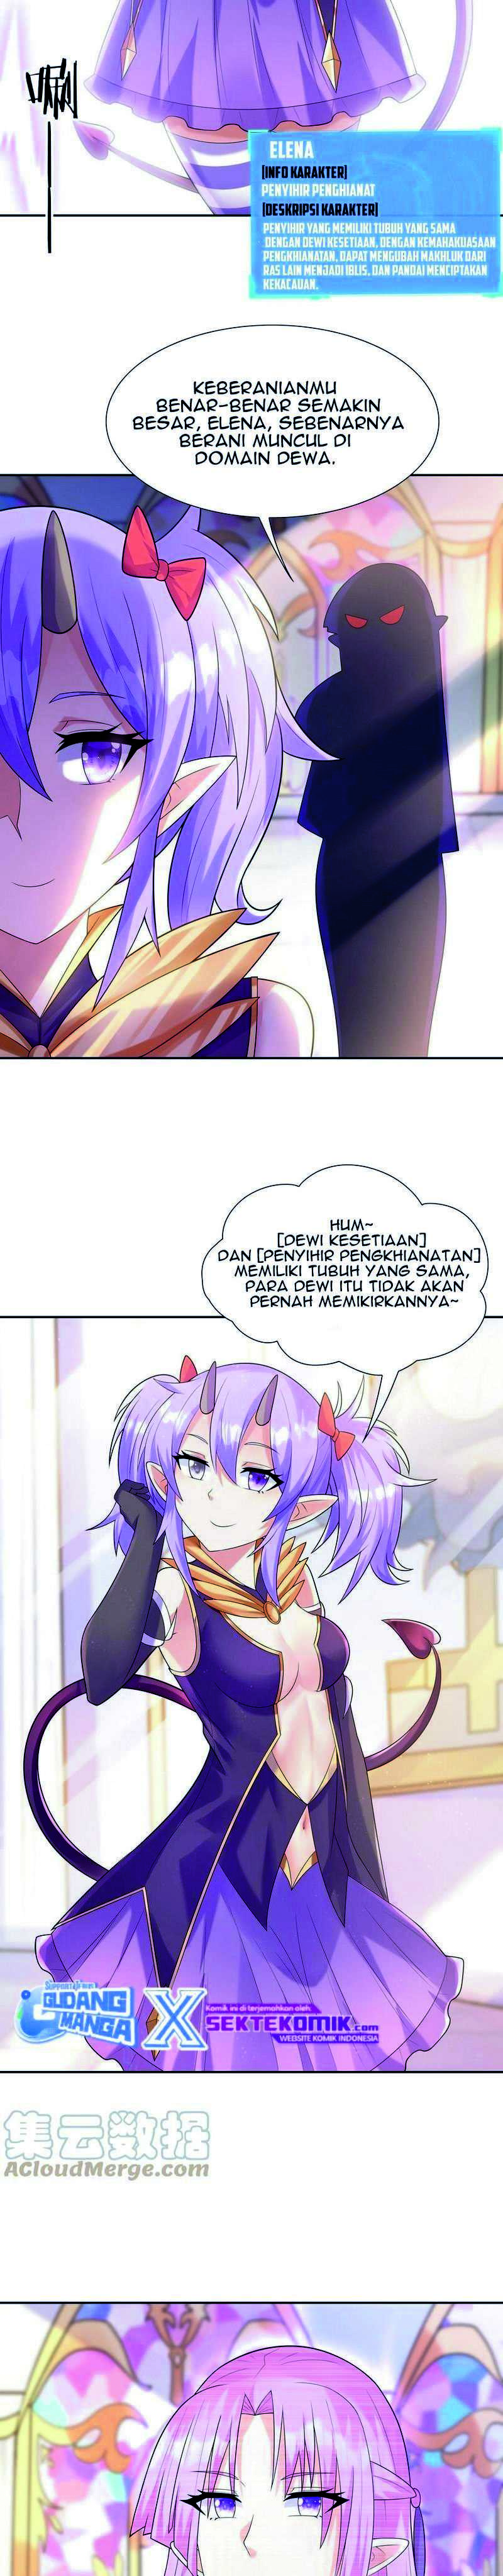 My Harem Is Entirely Female Demon Villains Chapter 27